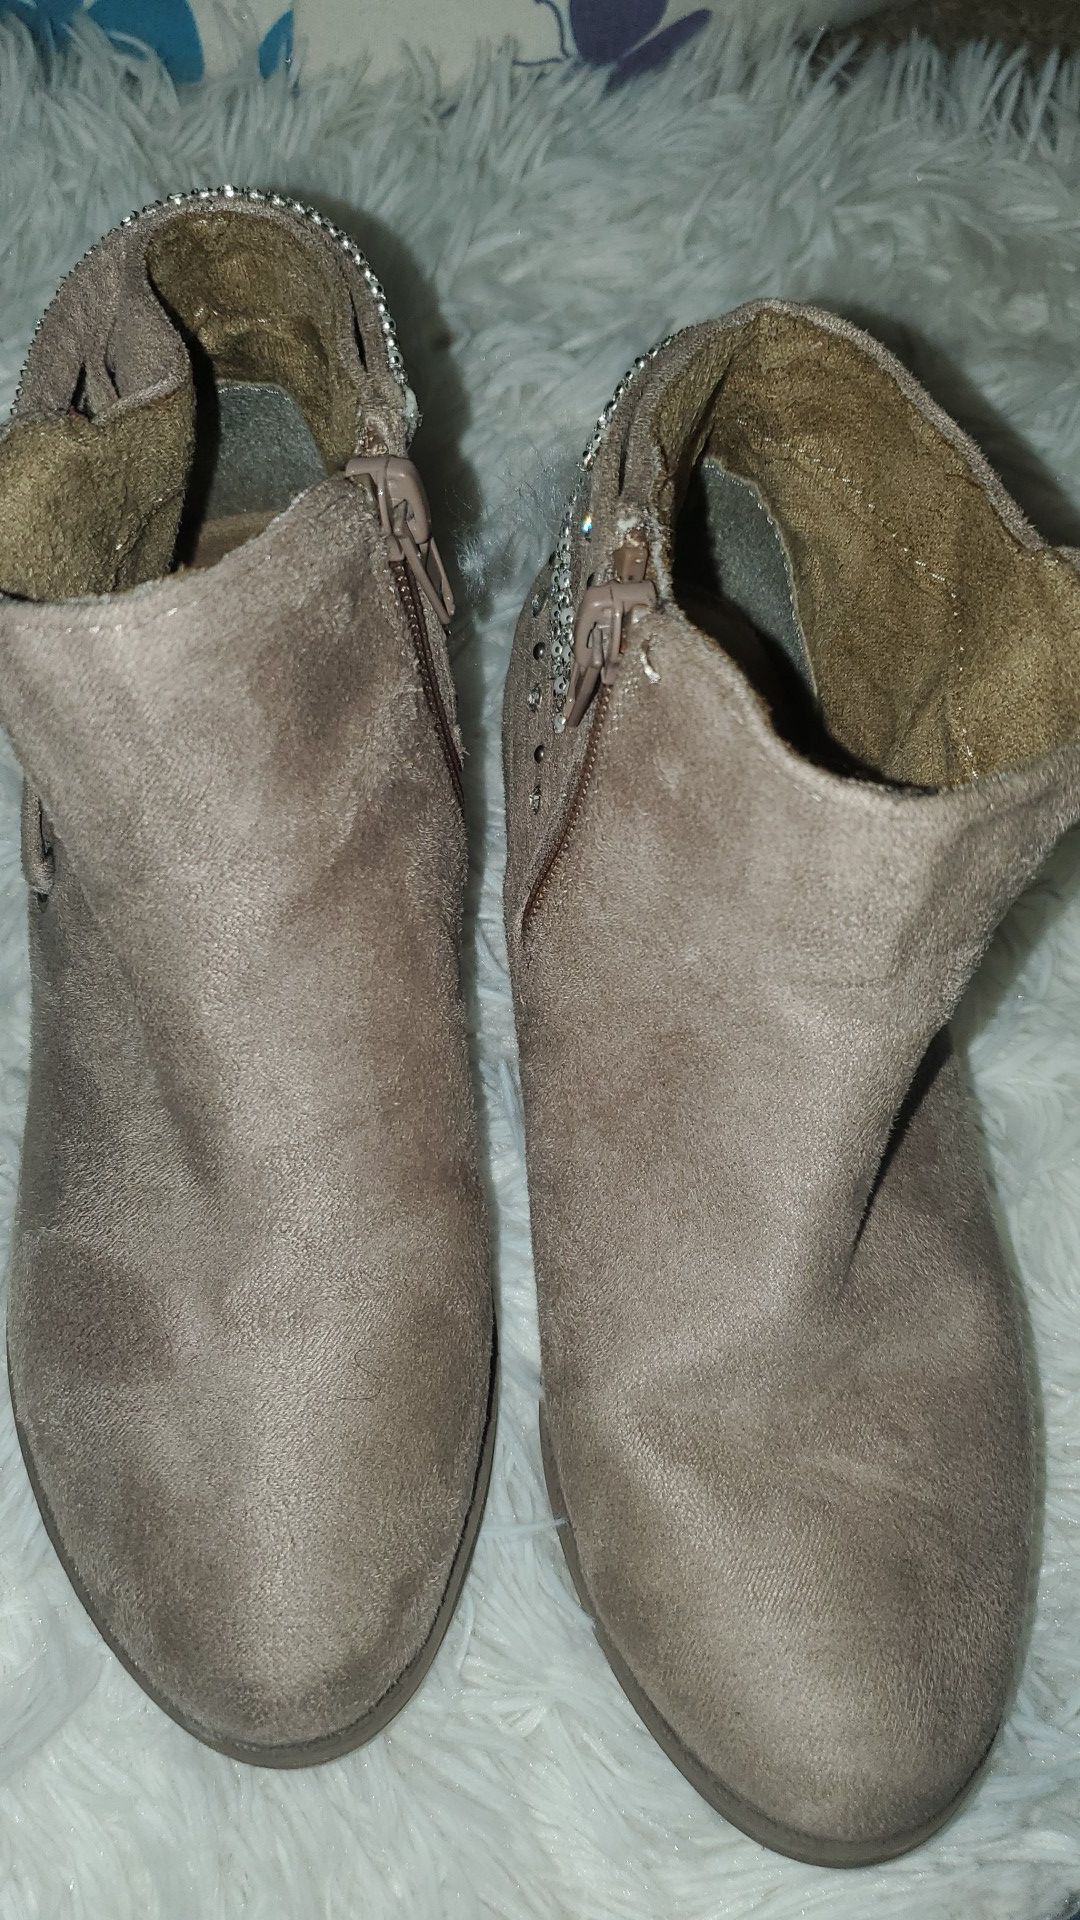 Girl's boots